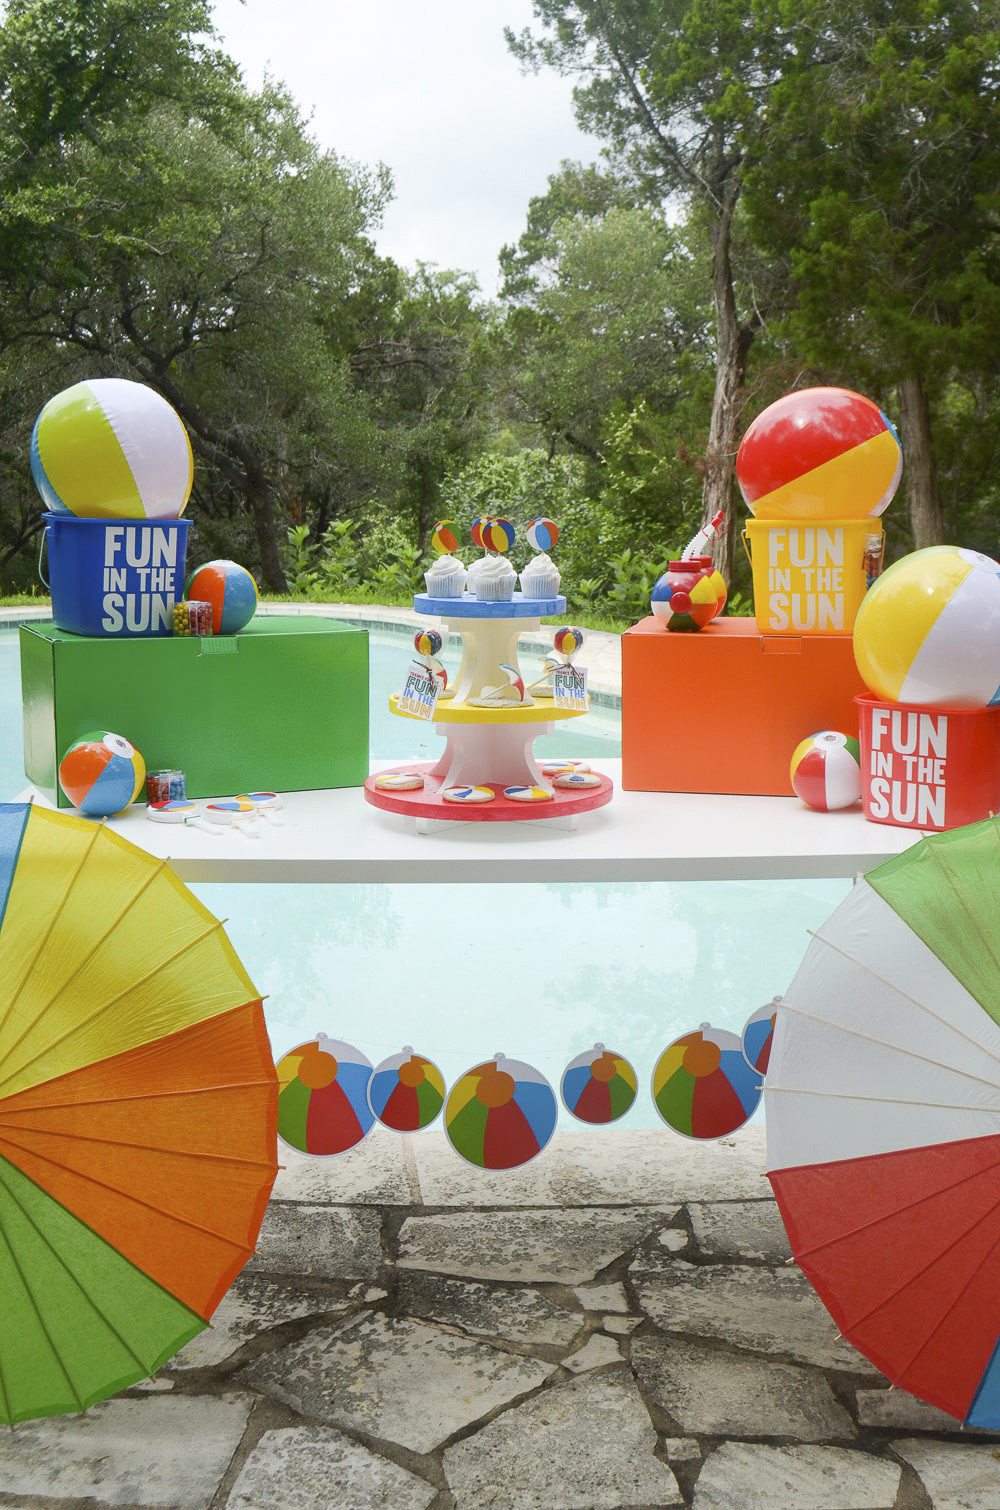 Beach Ball Themed Party Ideas
 Beach Ball Party by Lindi Haws of Love The Day